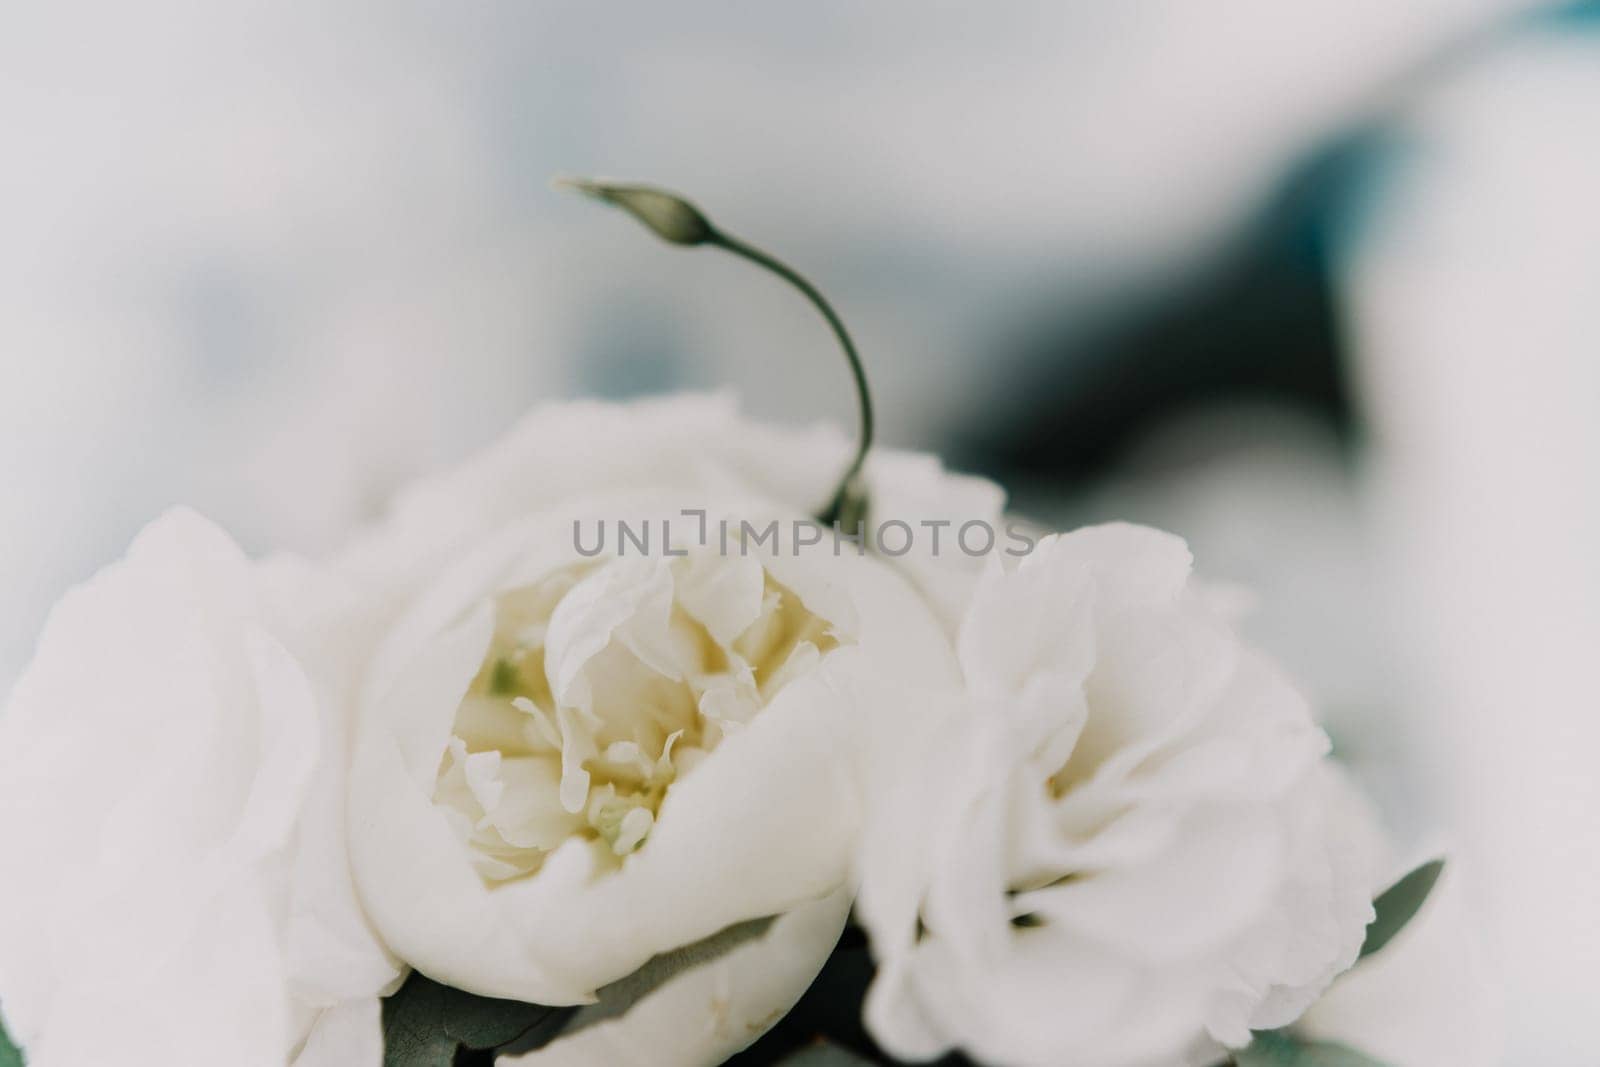 A bouquet of white flowers is sitting on a white surface. The flowers are arranged in a way that they are all facing the same direction, creating a sense of unity and harmony